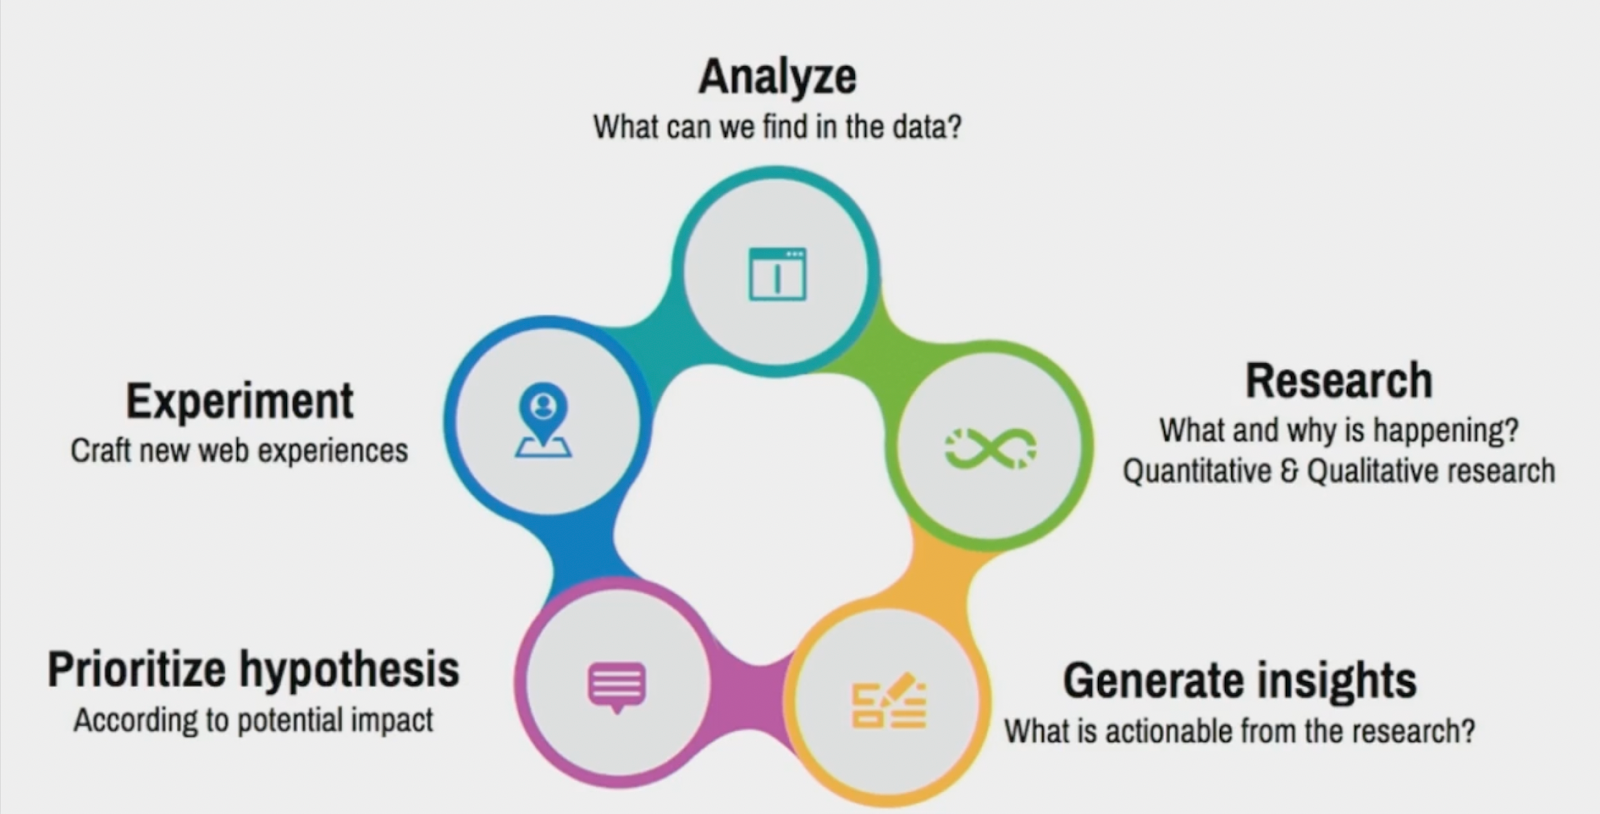 An infographic that has five points: 1) analyze - what can we find in the data? 2) Research - What and why is happening? Quantitative and qualitative research. 3) Generate insights - what is actionable from the research? 4) Prioritize hypothesis - according to potential impact. 5) Experiment - craft new web experiences. 